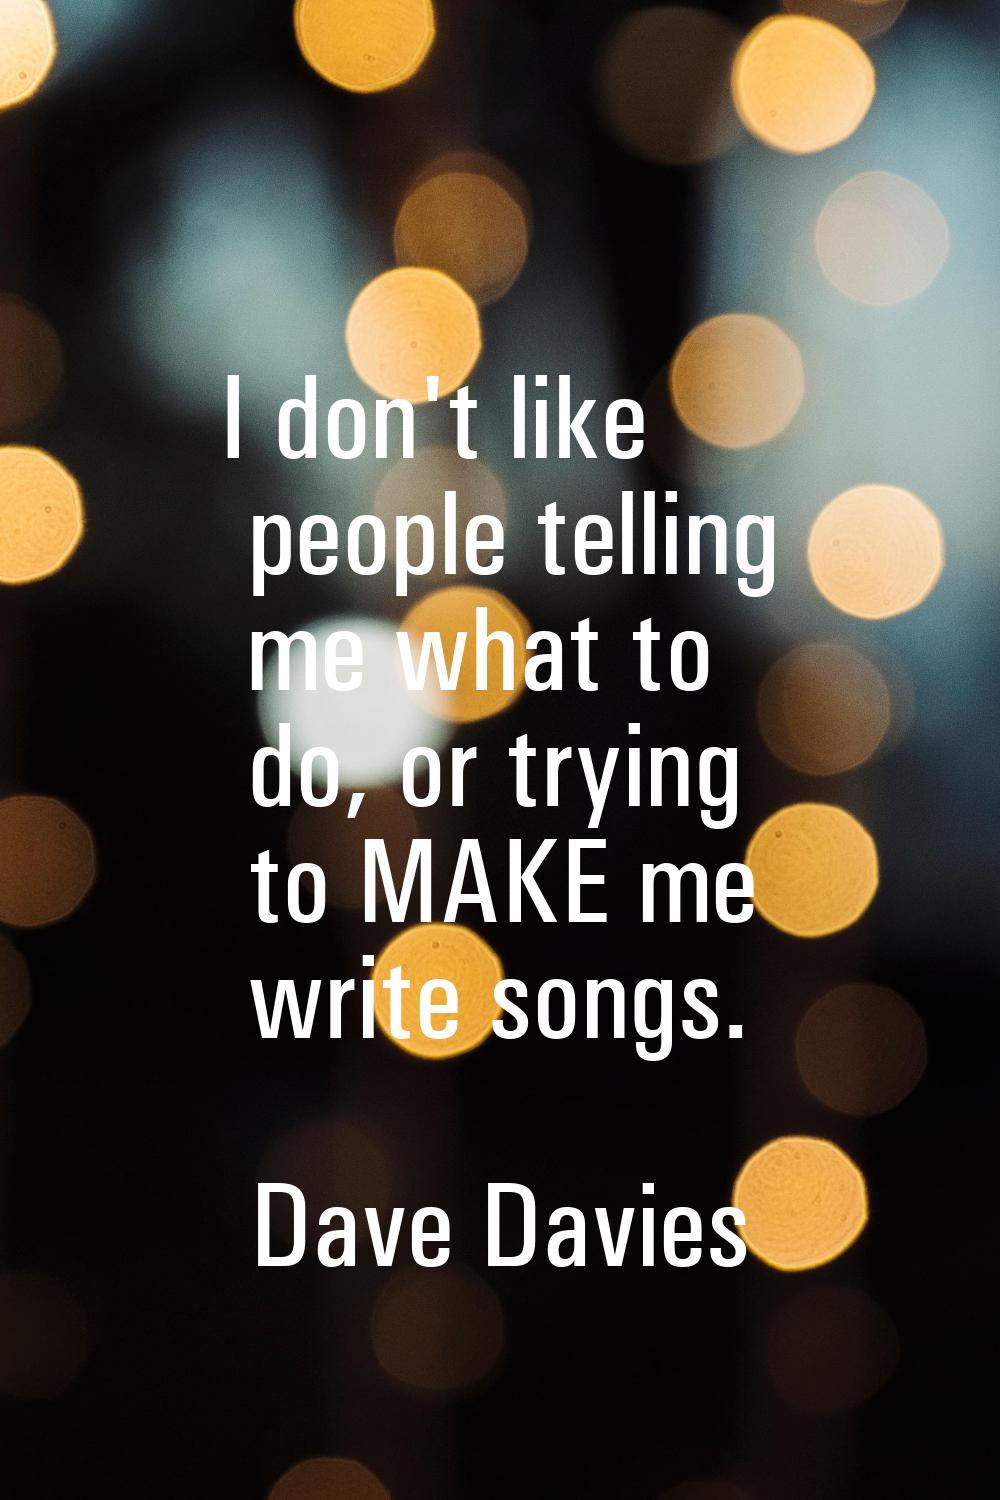 I don't like people telling me what to do, or trying to MAKE me write songs.